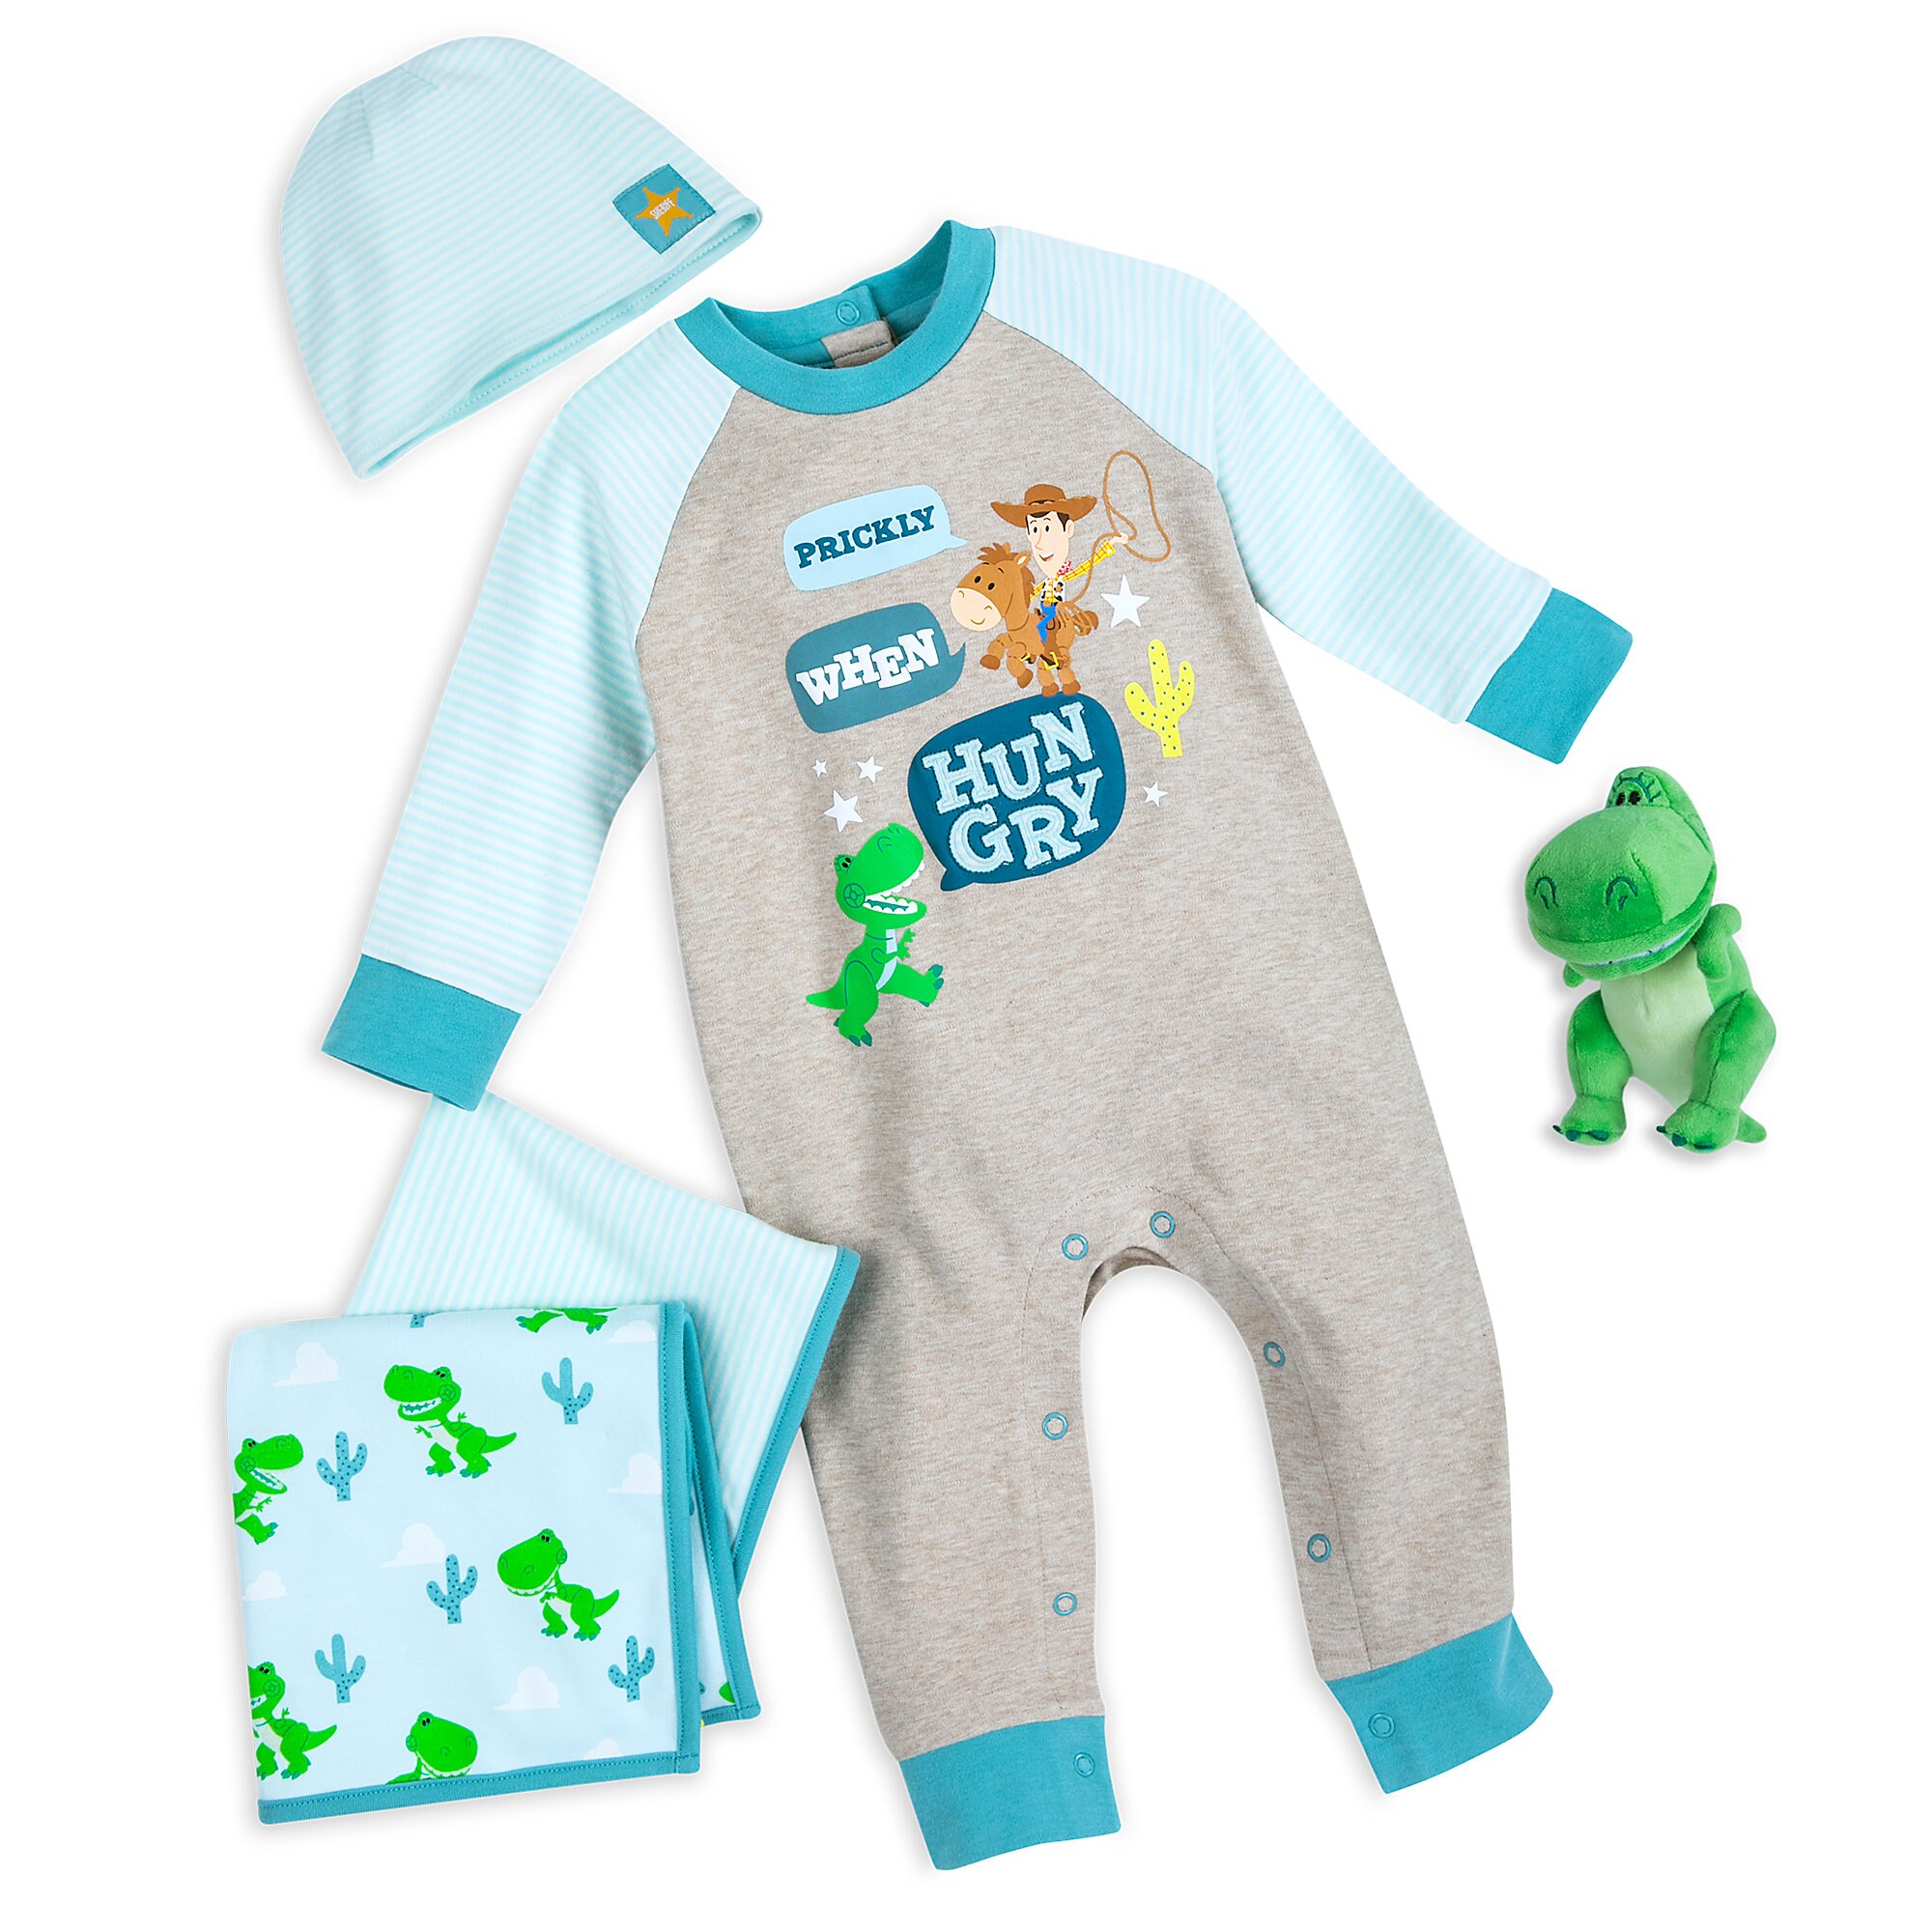 Woody Gift Set for Baby - Toy Story